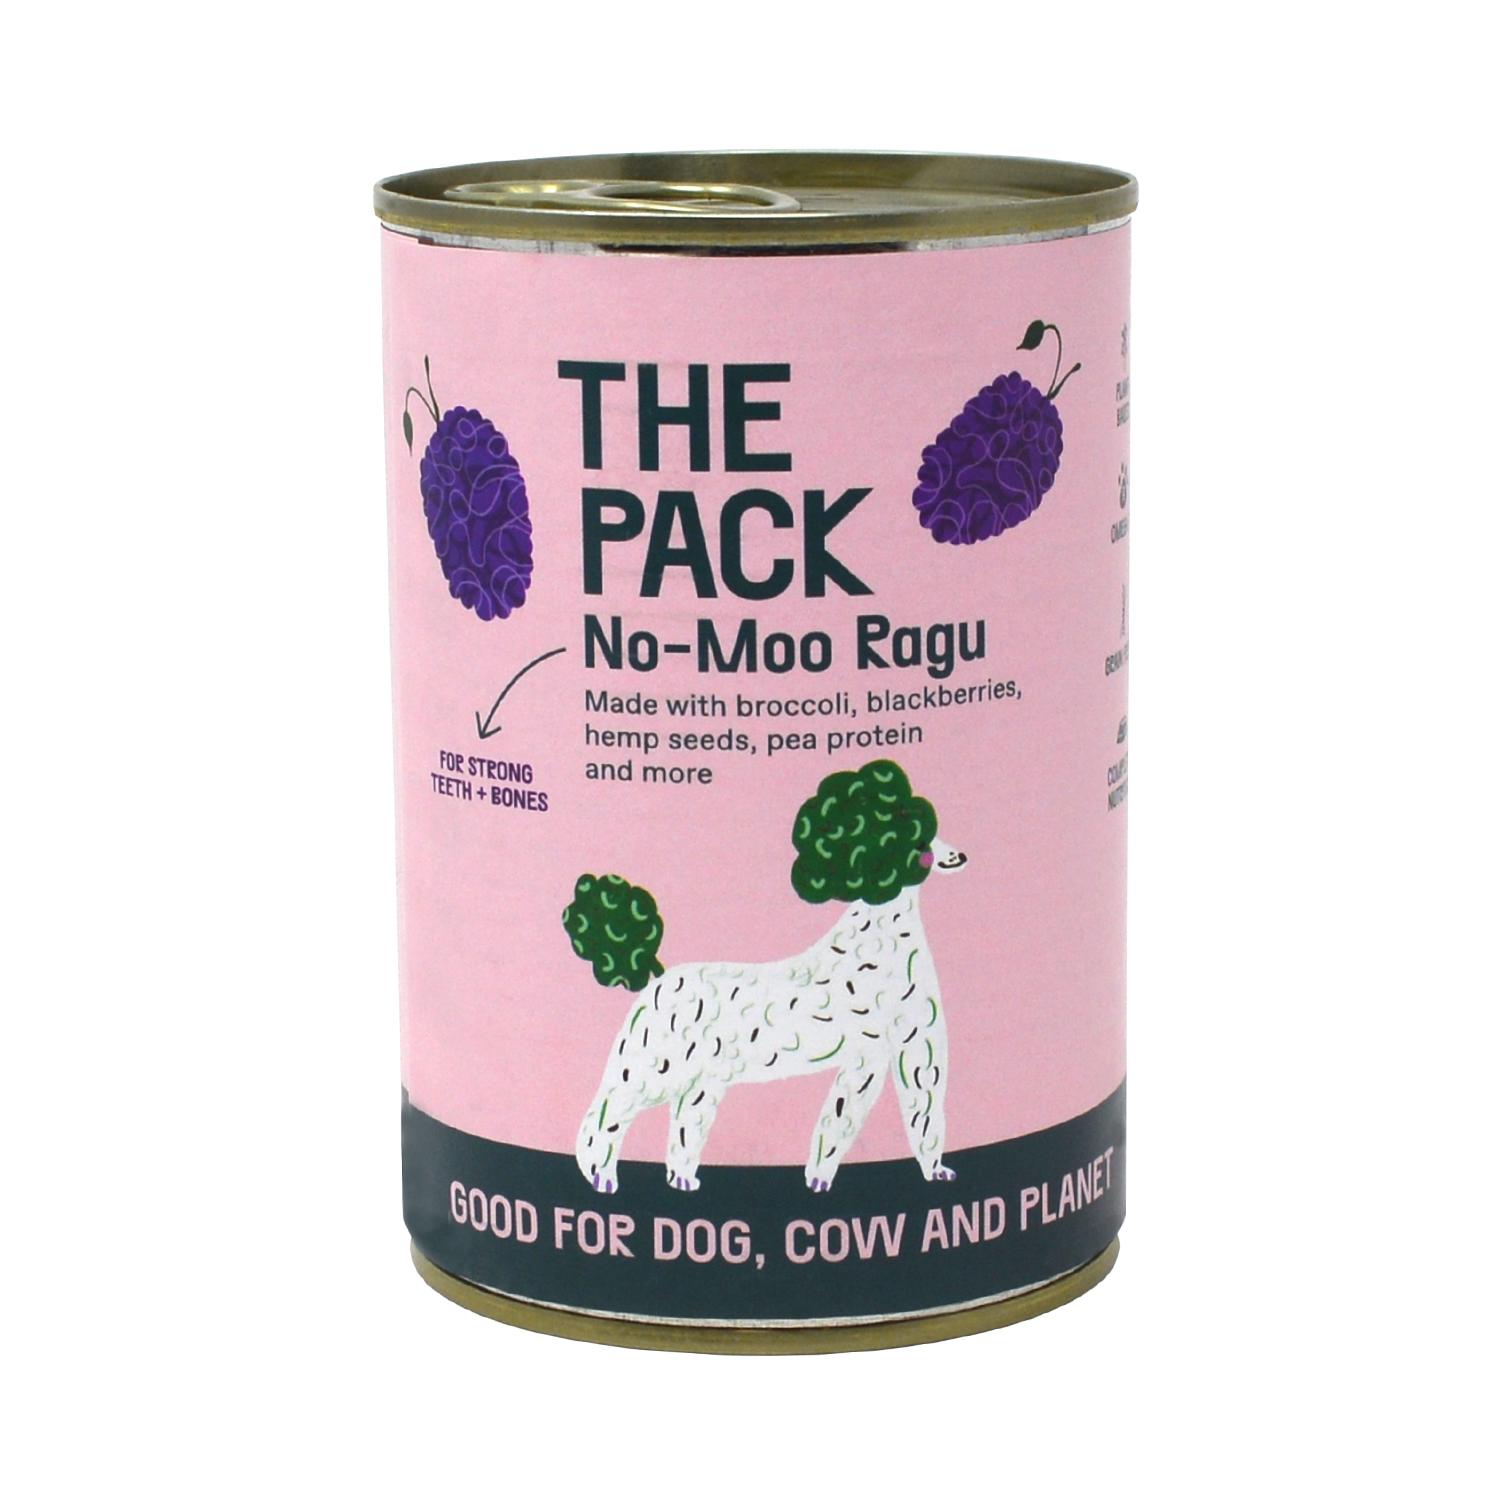 Front of a can of No-Moo Ragu Hypoallergenic Vegan Dog Food from The Pack